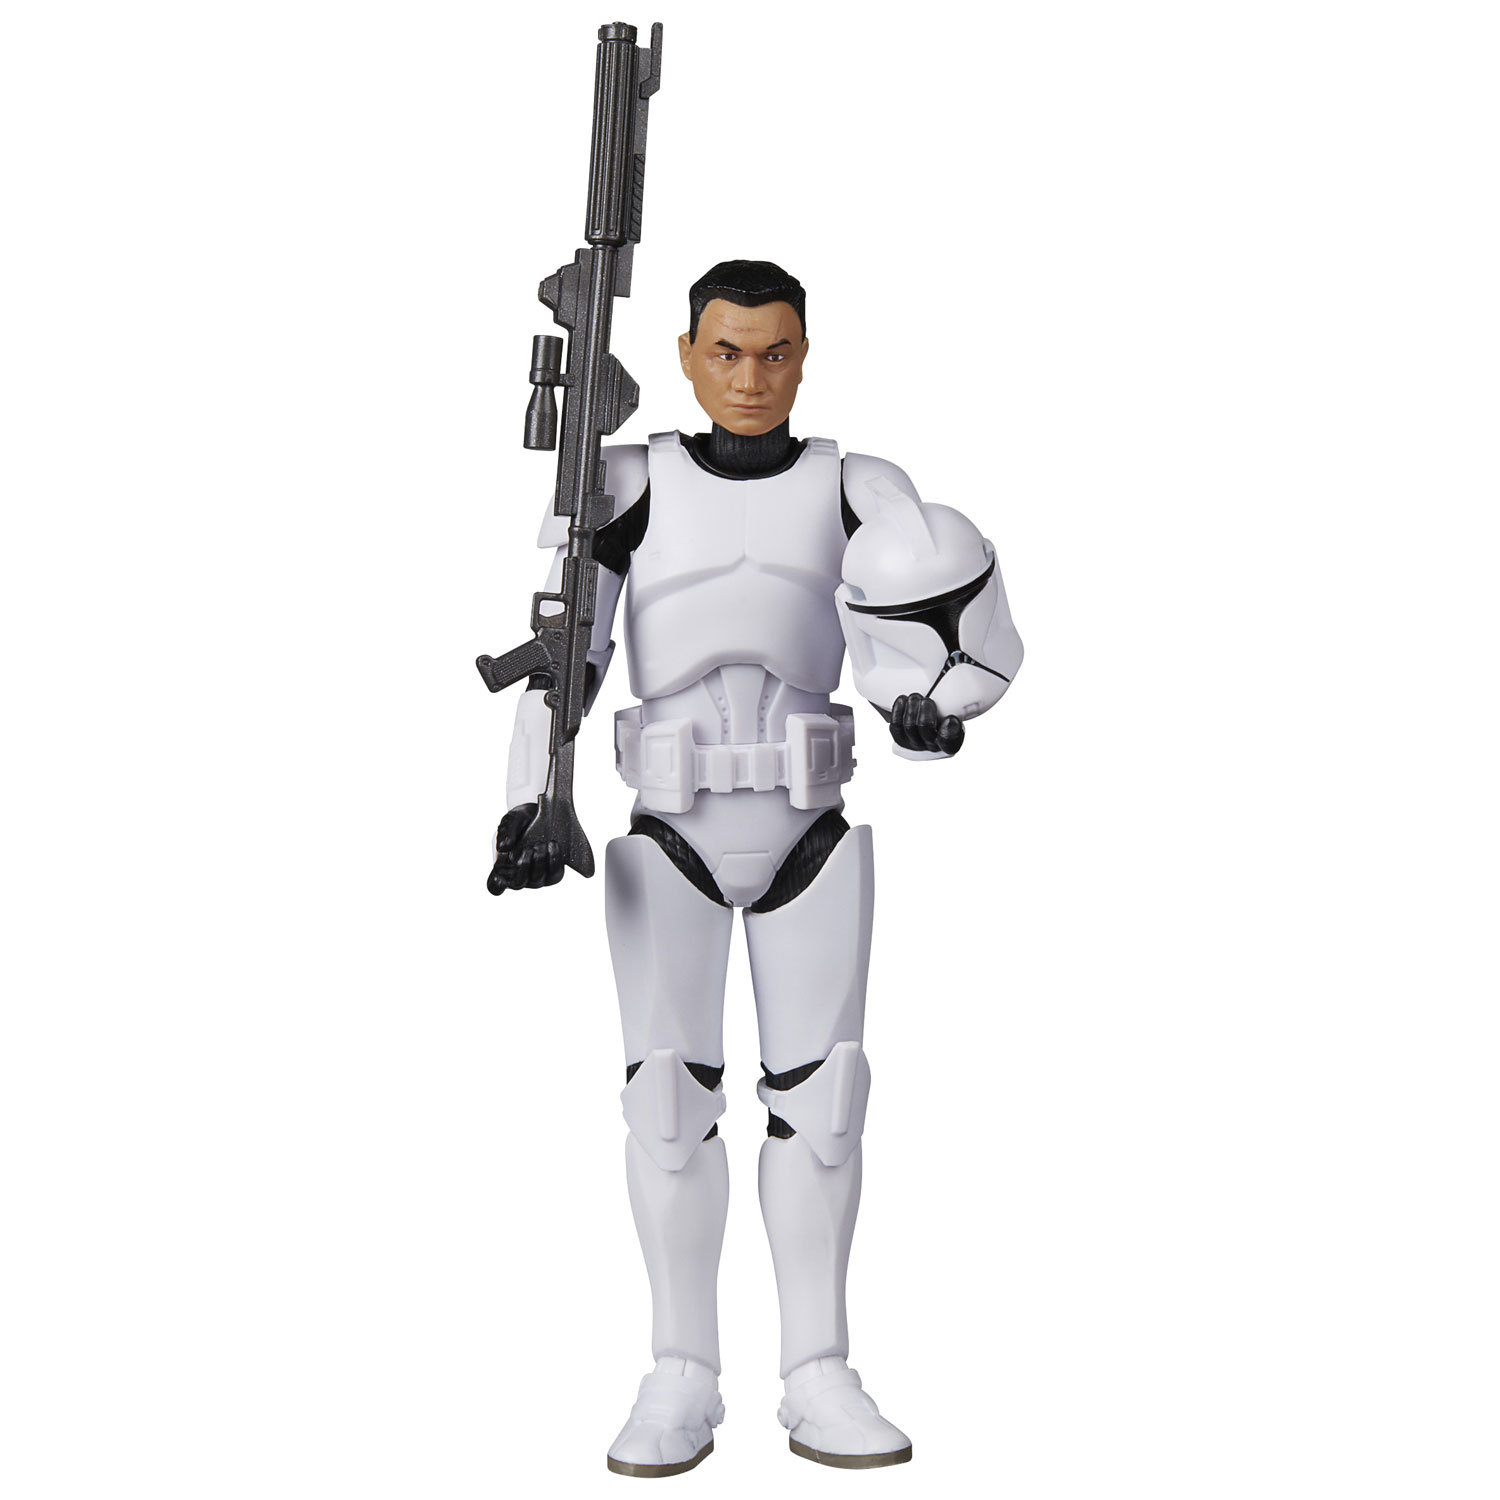 Hasbro Star Wars The Black Series - Phase I Clone Trooper Action Figure